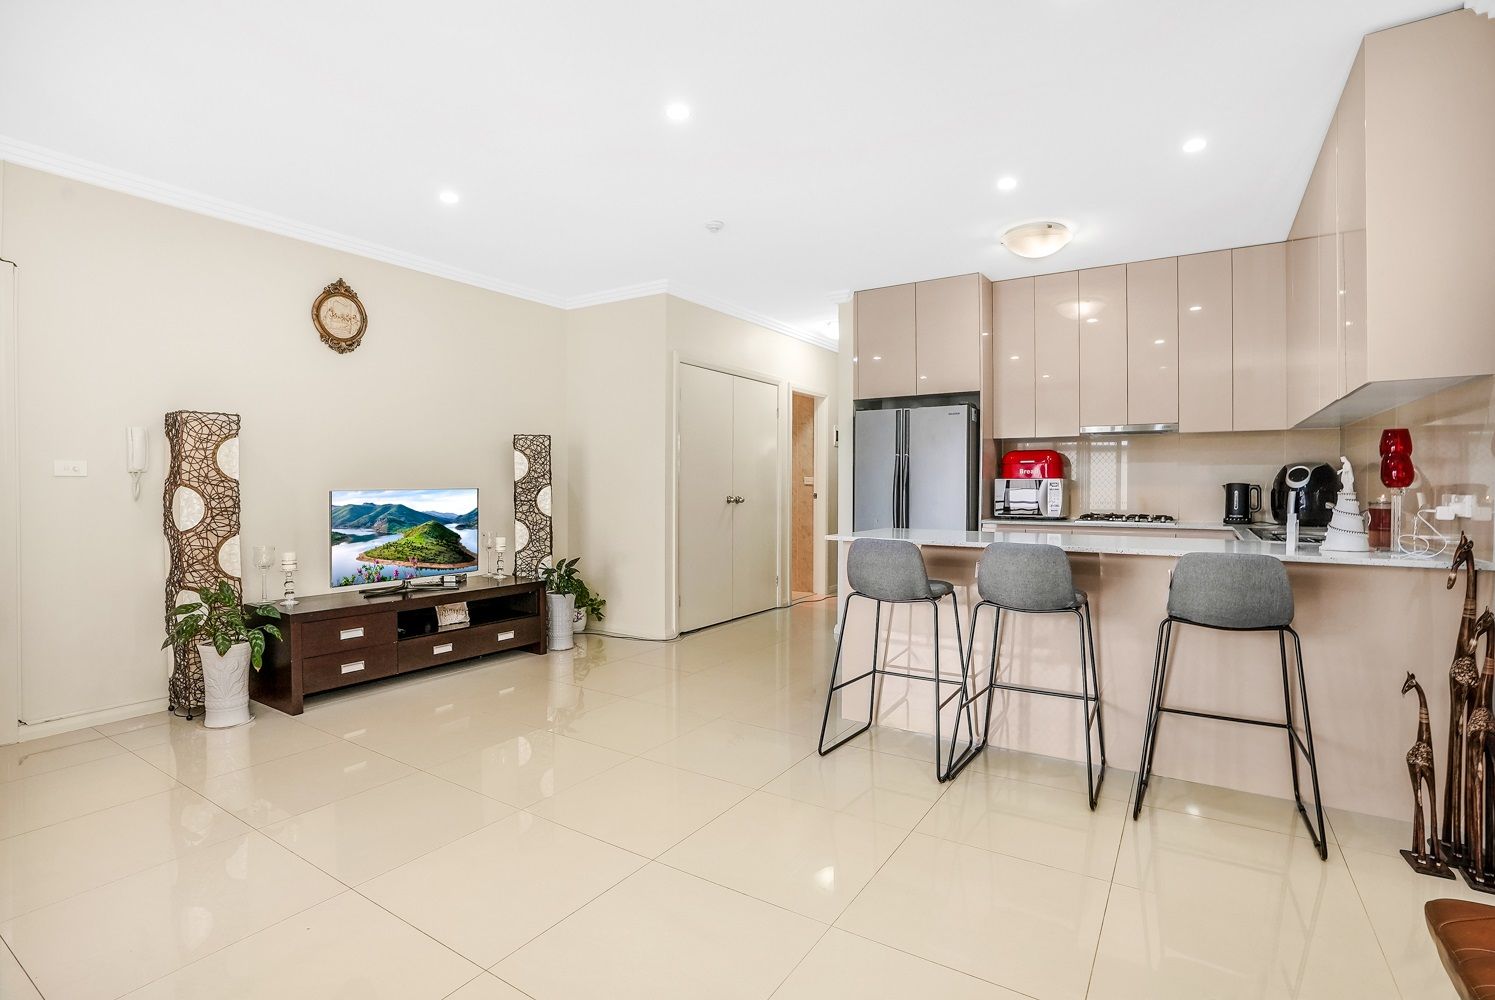 2 bedrooms Apartment / Unit / Flat in 10/133 Polding Street FAIRFIELD HEIGHTS NSW, 2165